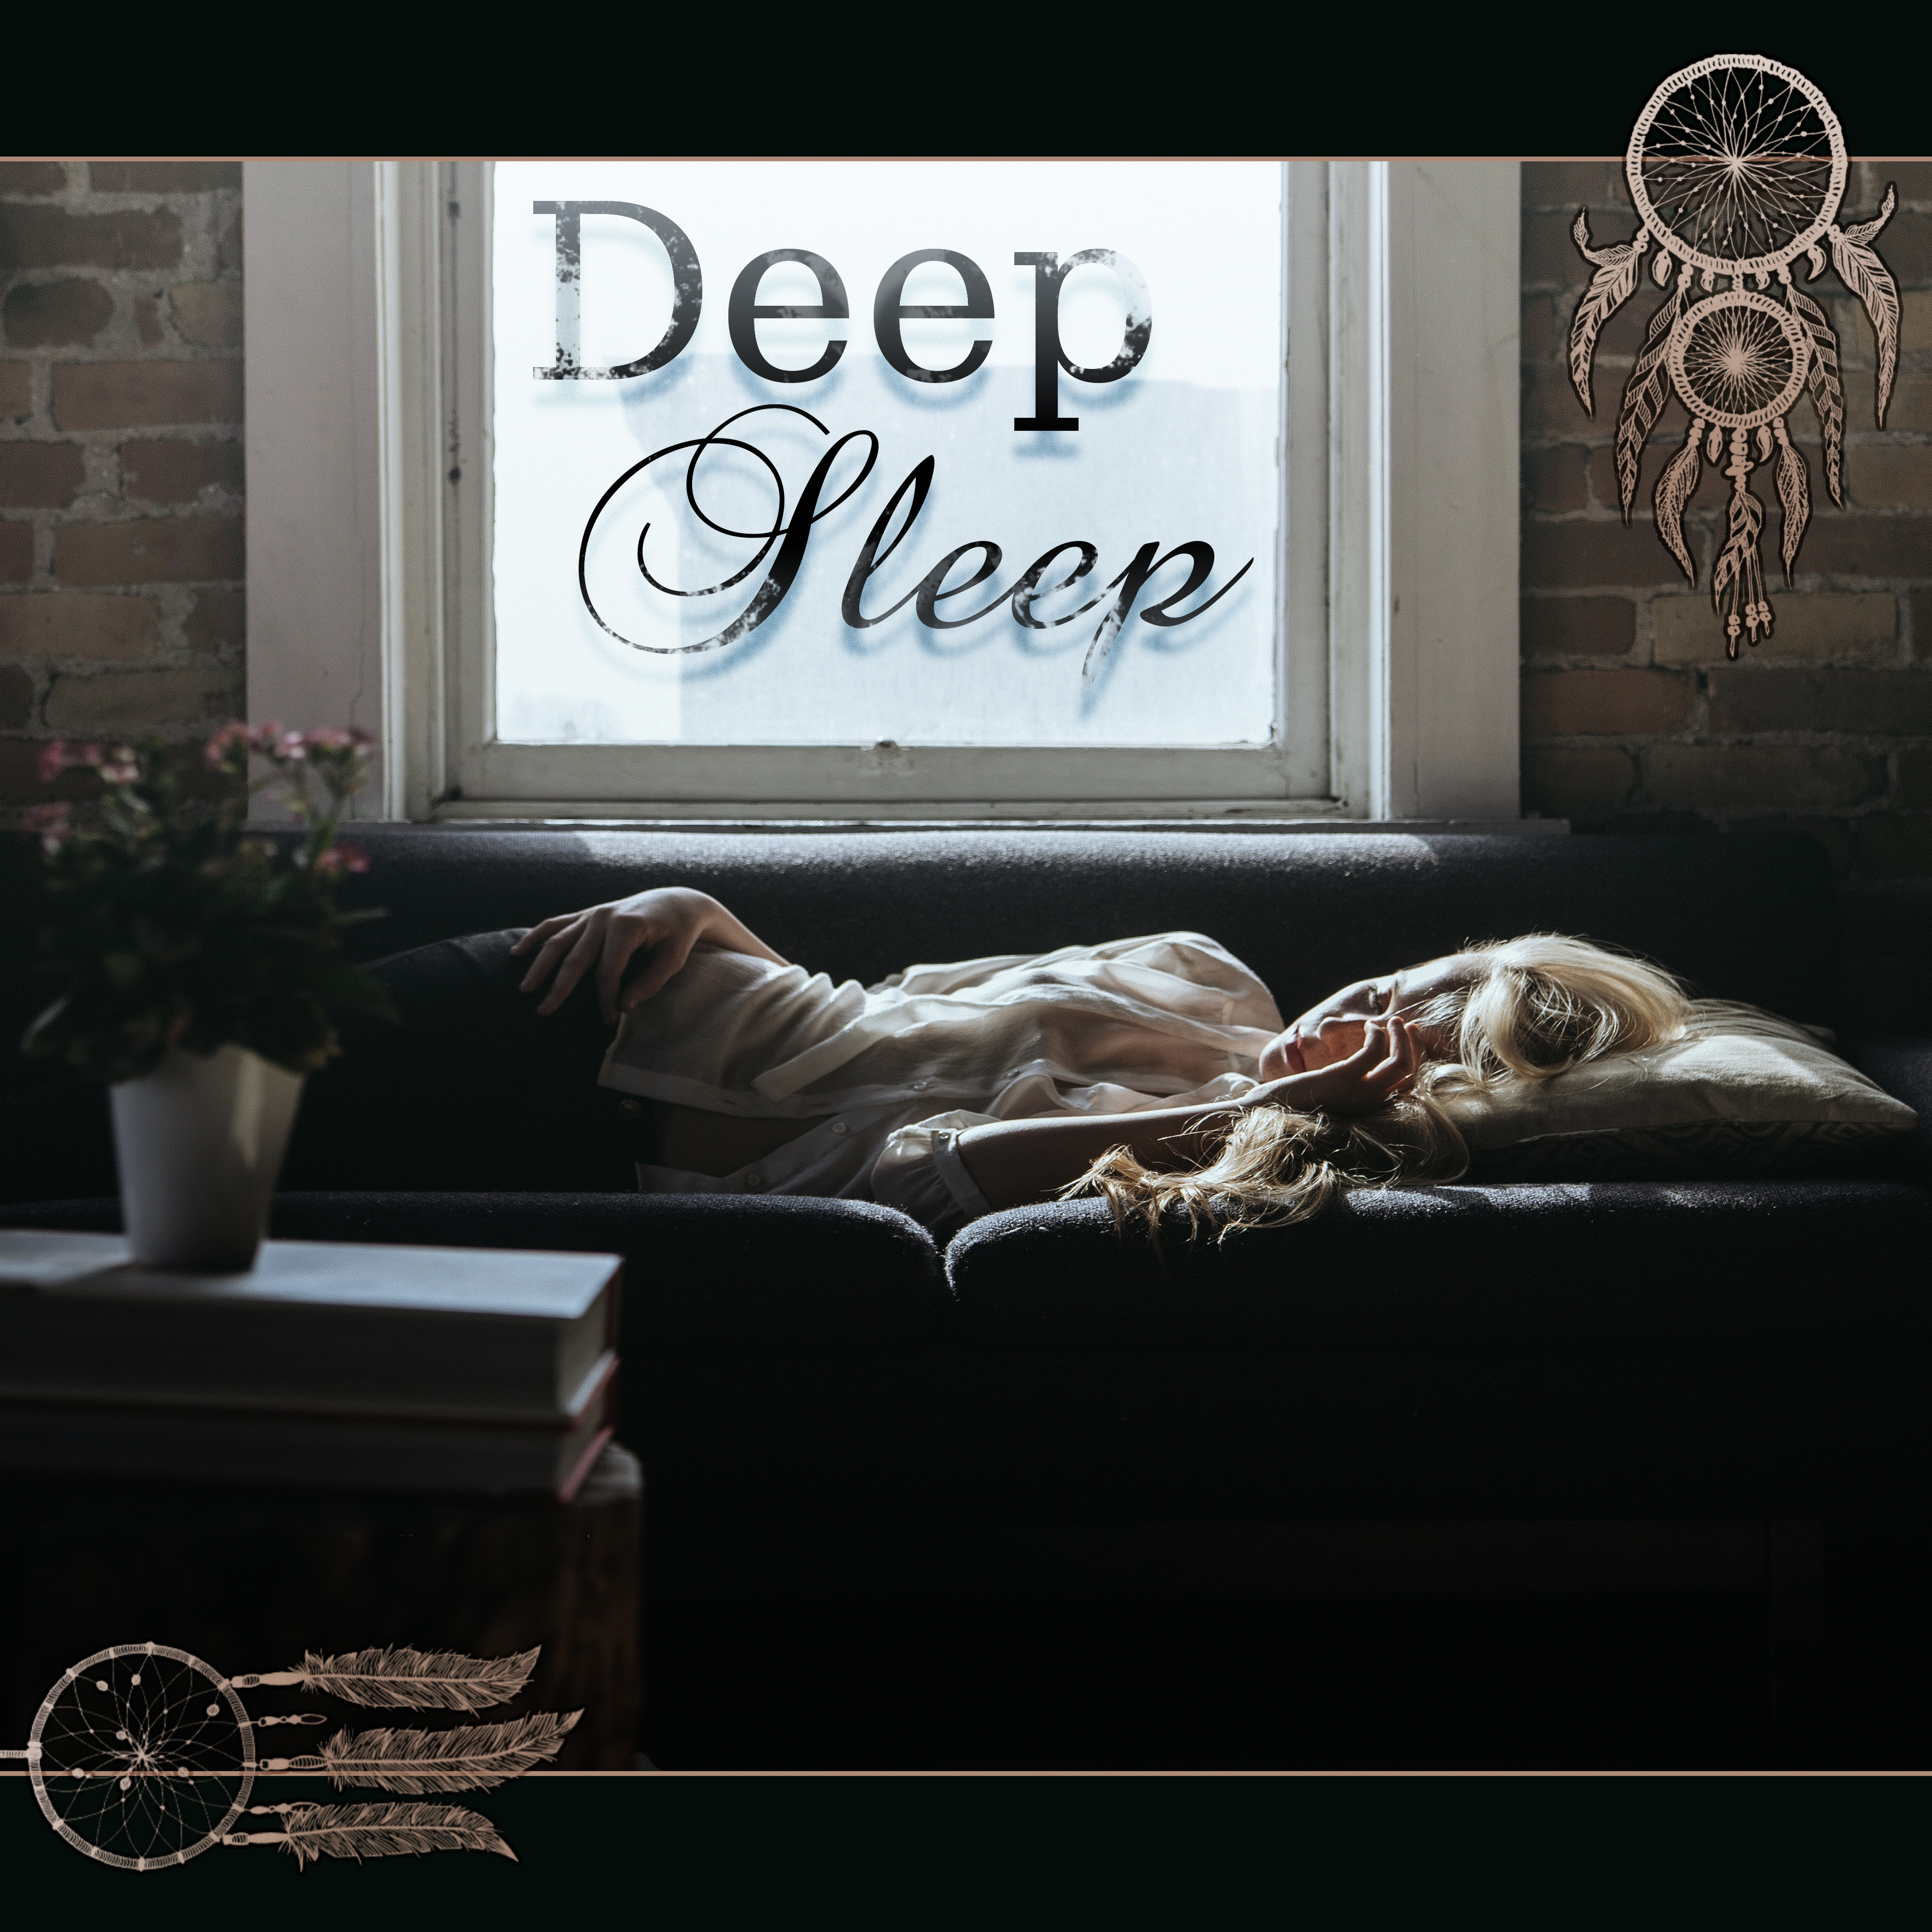 Deep Sleep  Dream, Nap Nature Sounds, Calmness, Lullaby, Relaxation, Sleep Therapy